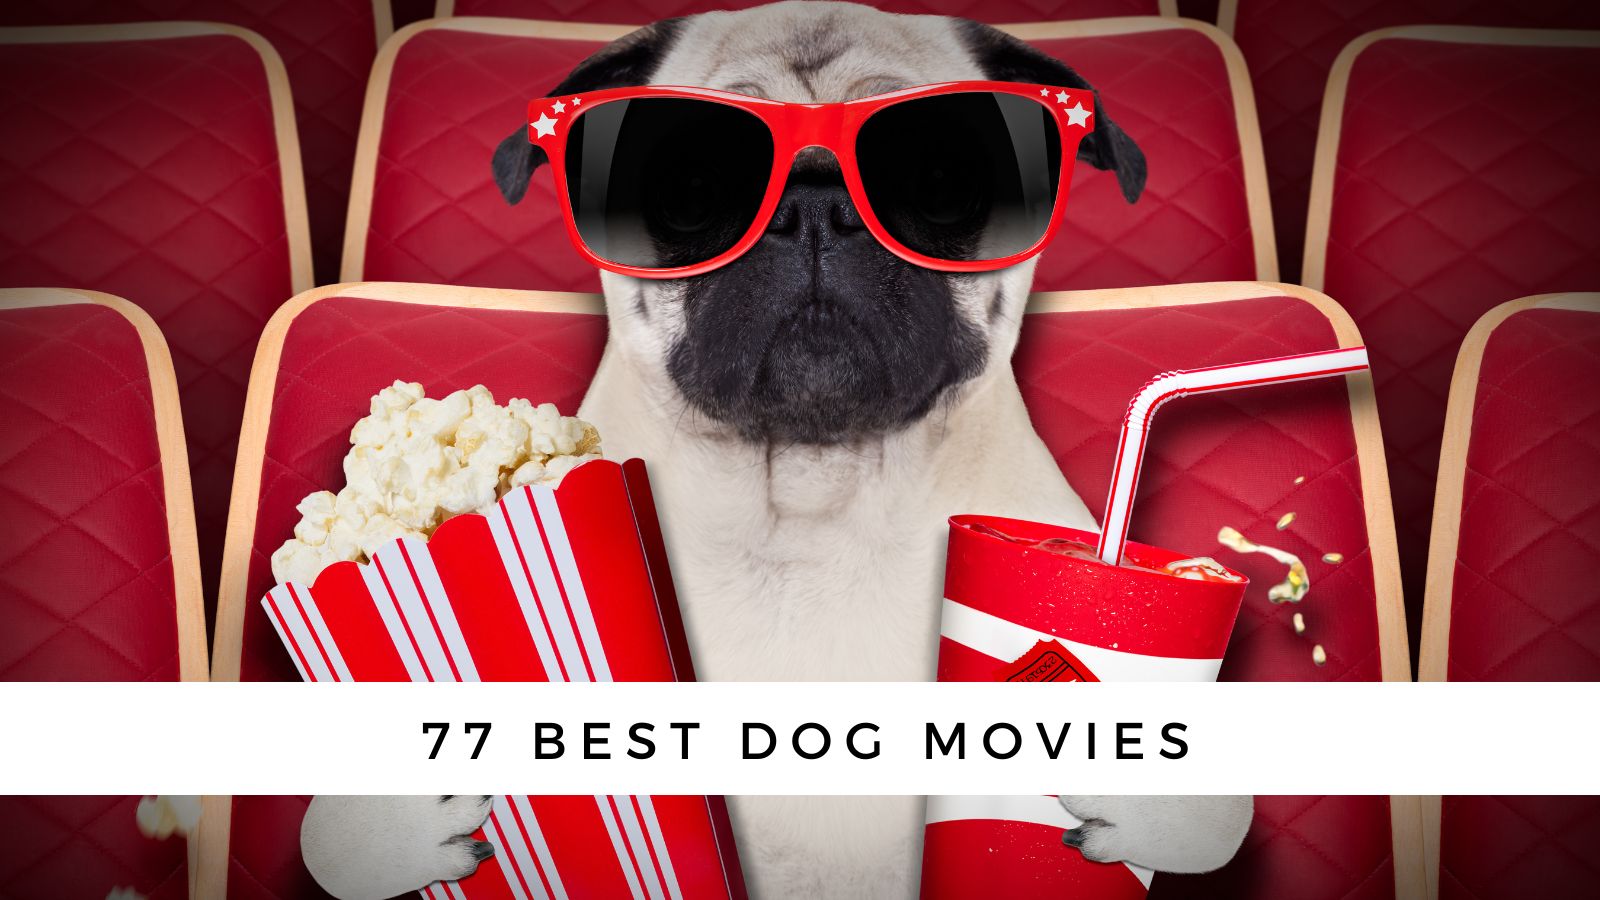 77 Best Dog Movies to You Laugh Cry!